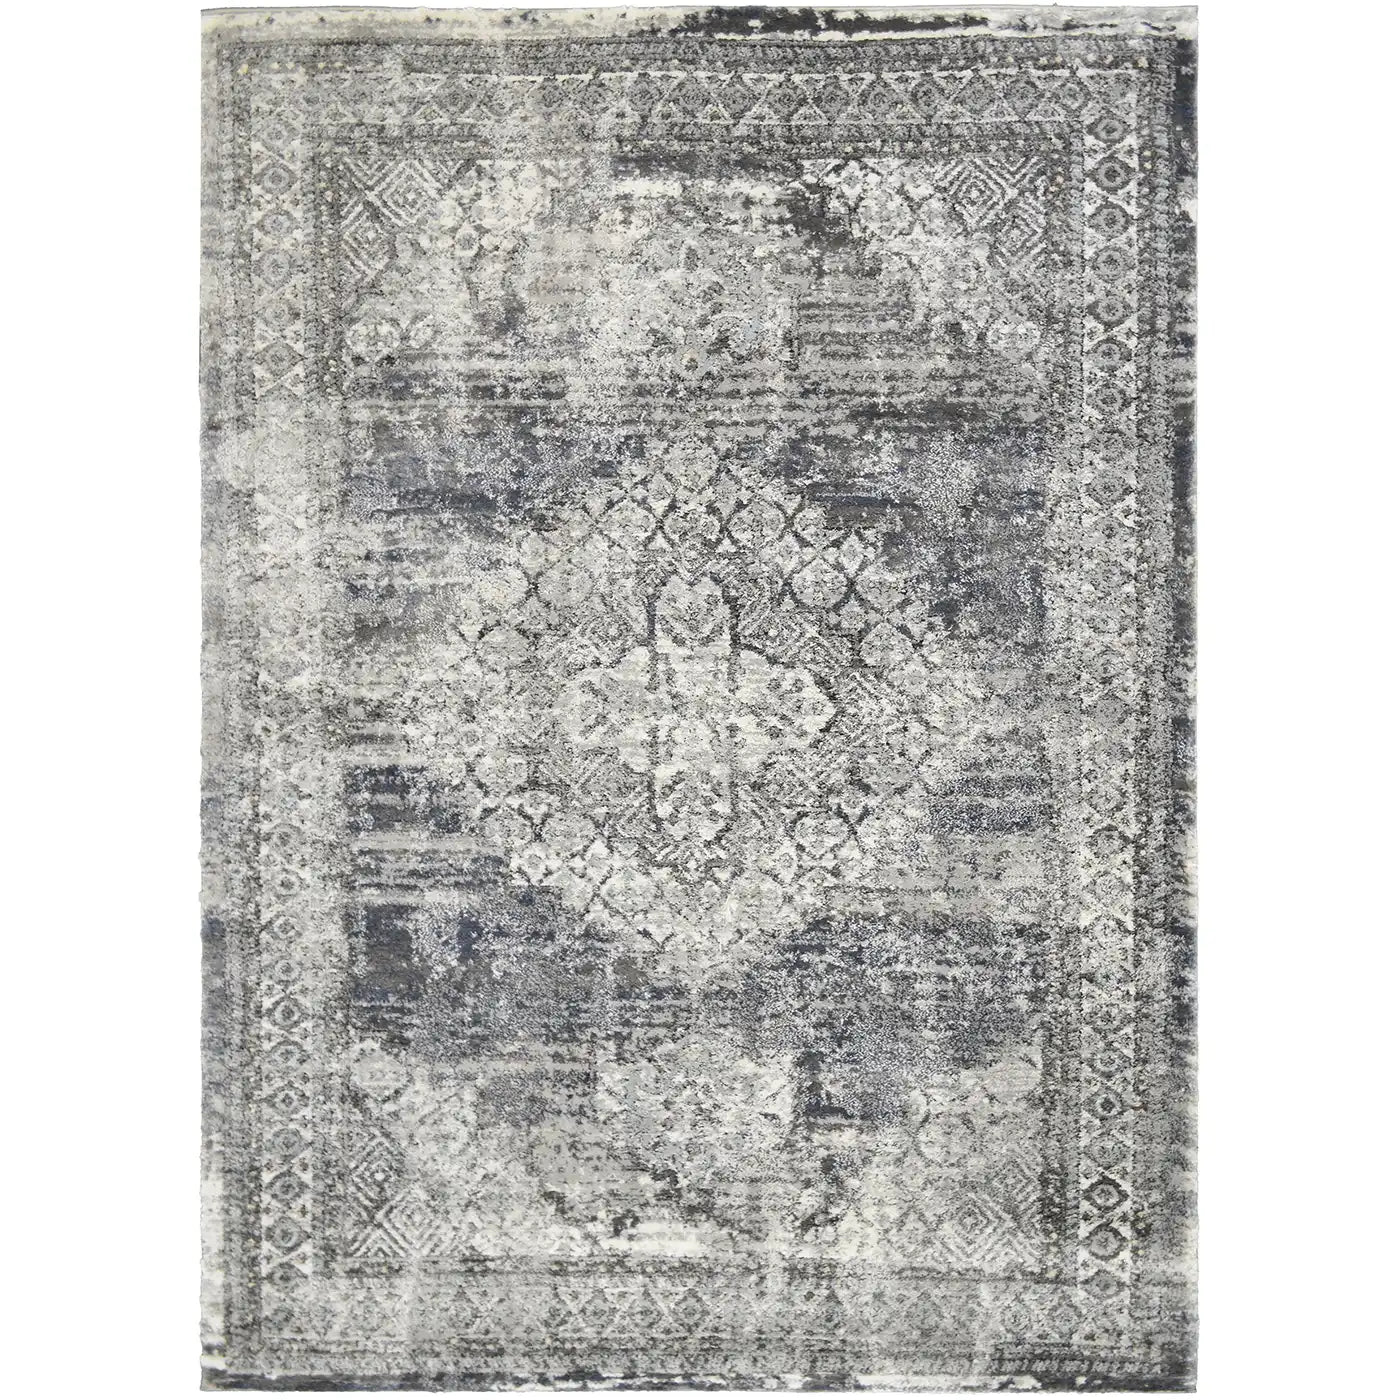 Mayberry Wingate Rug in Oriental/Traditional & Vintage/Distressed style.